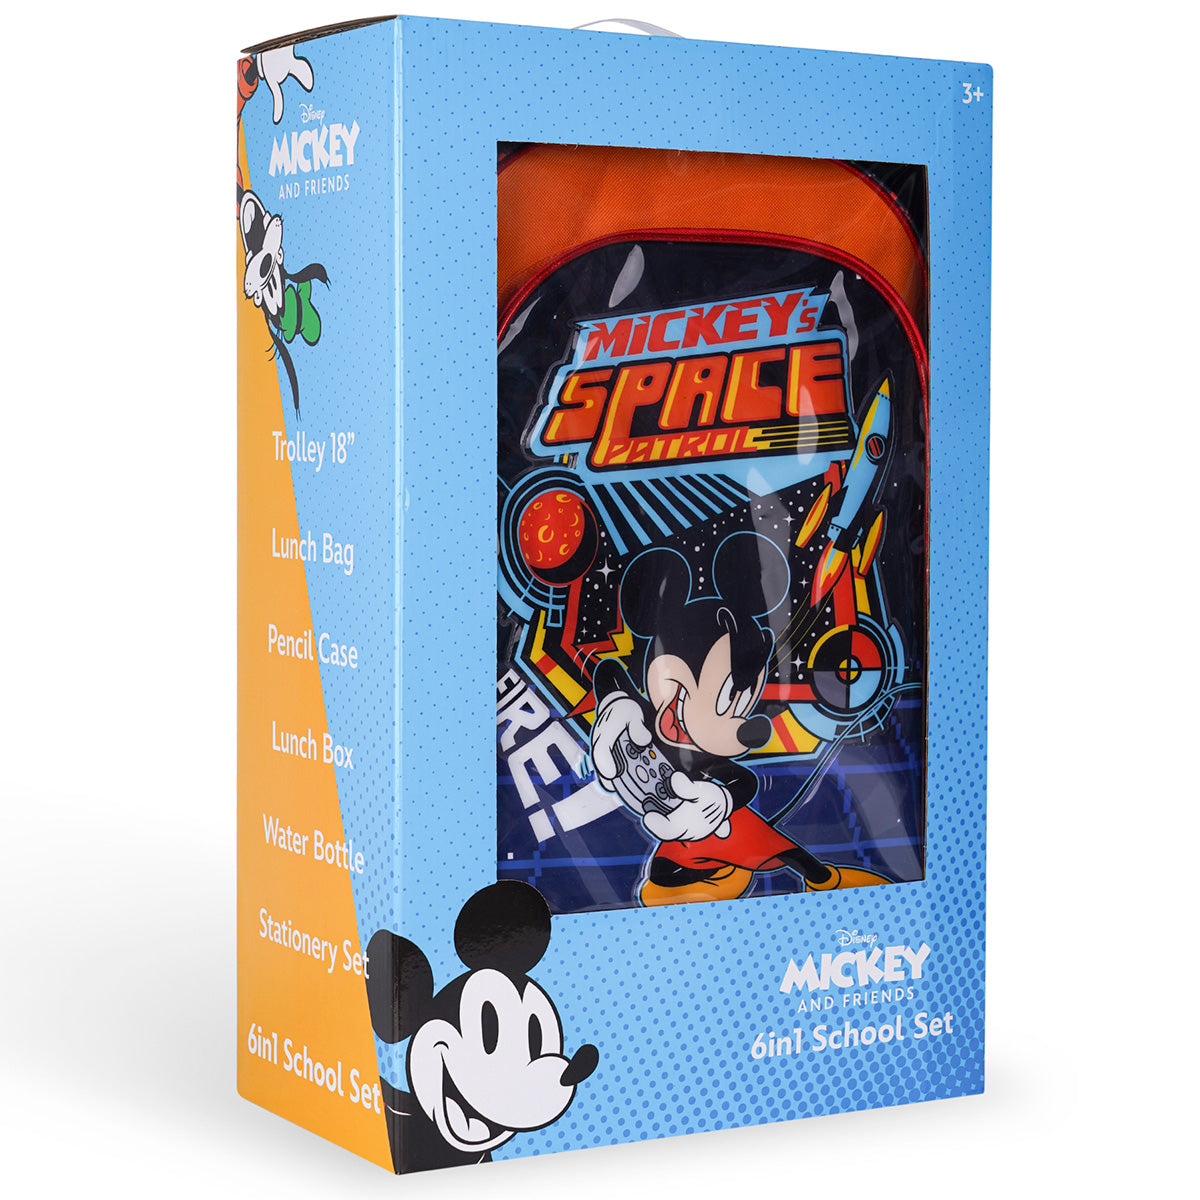 Disney Mickey Mouse Space Patrol 6in1 Box Set 18"